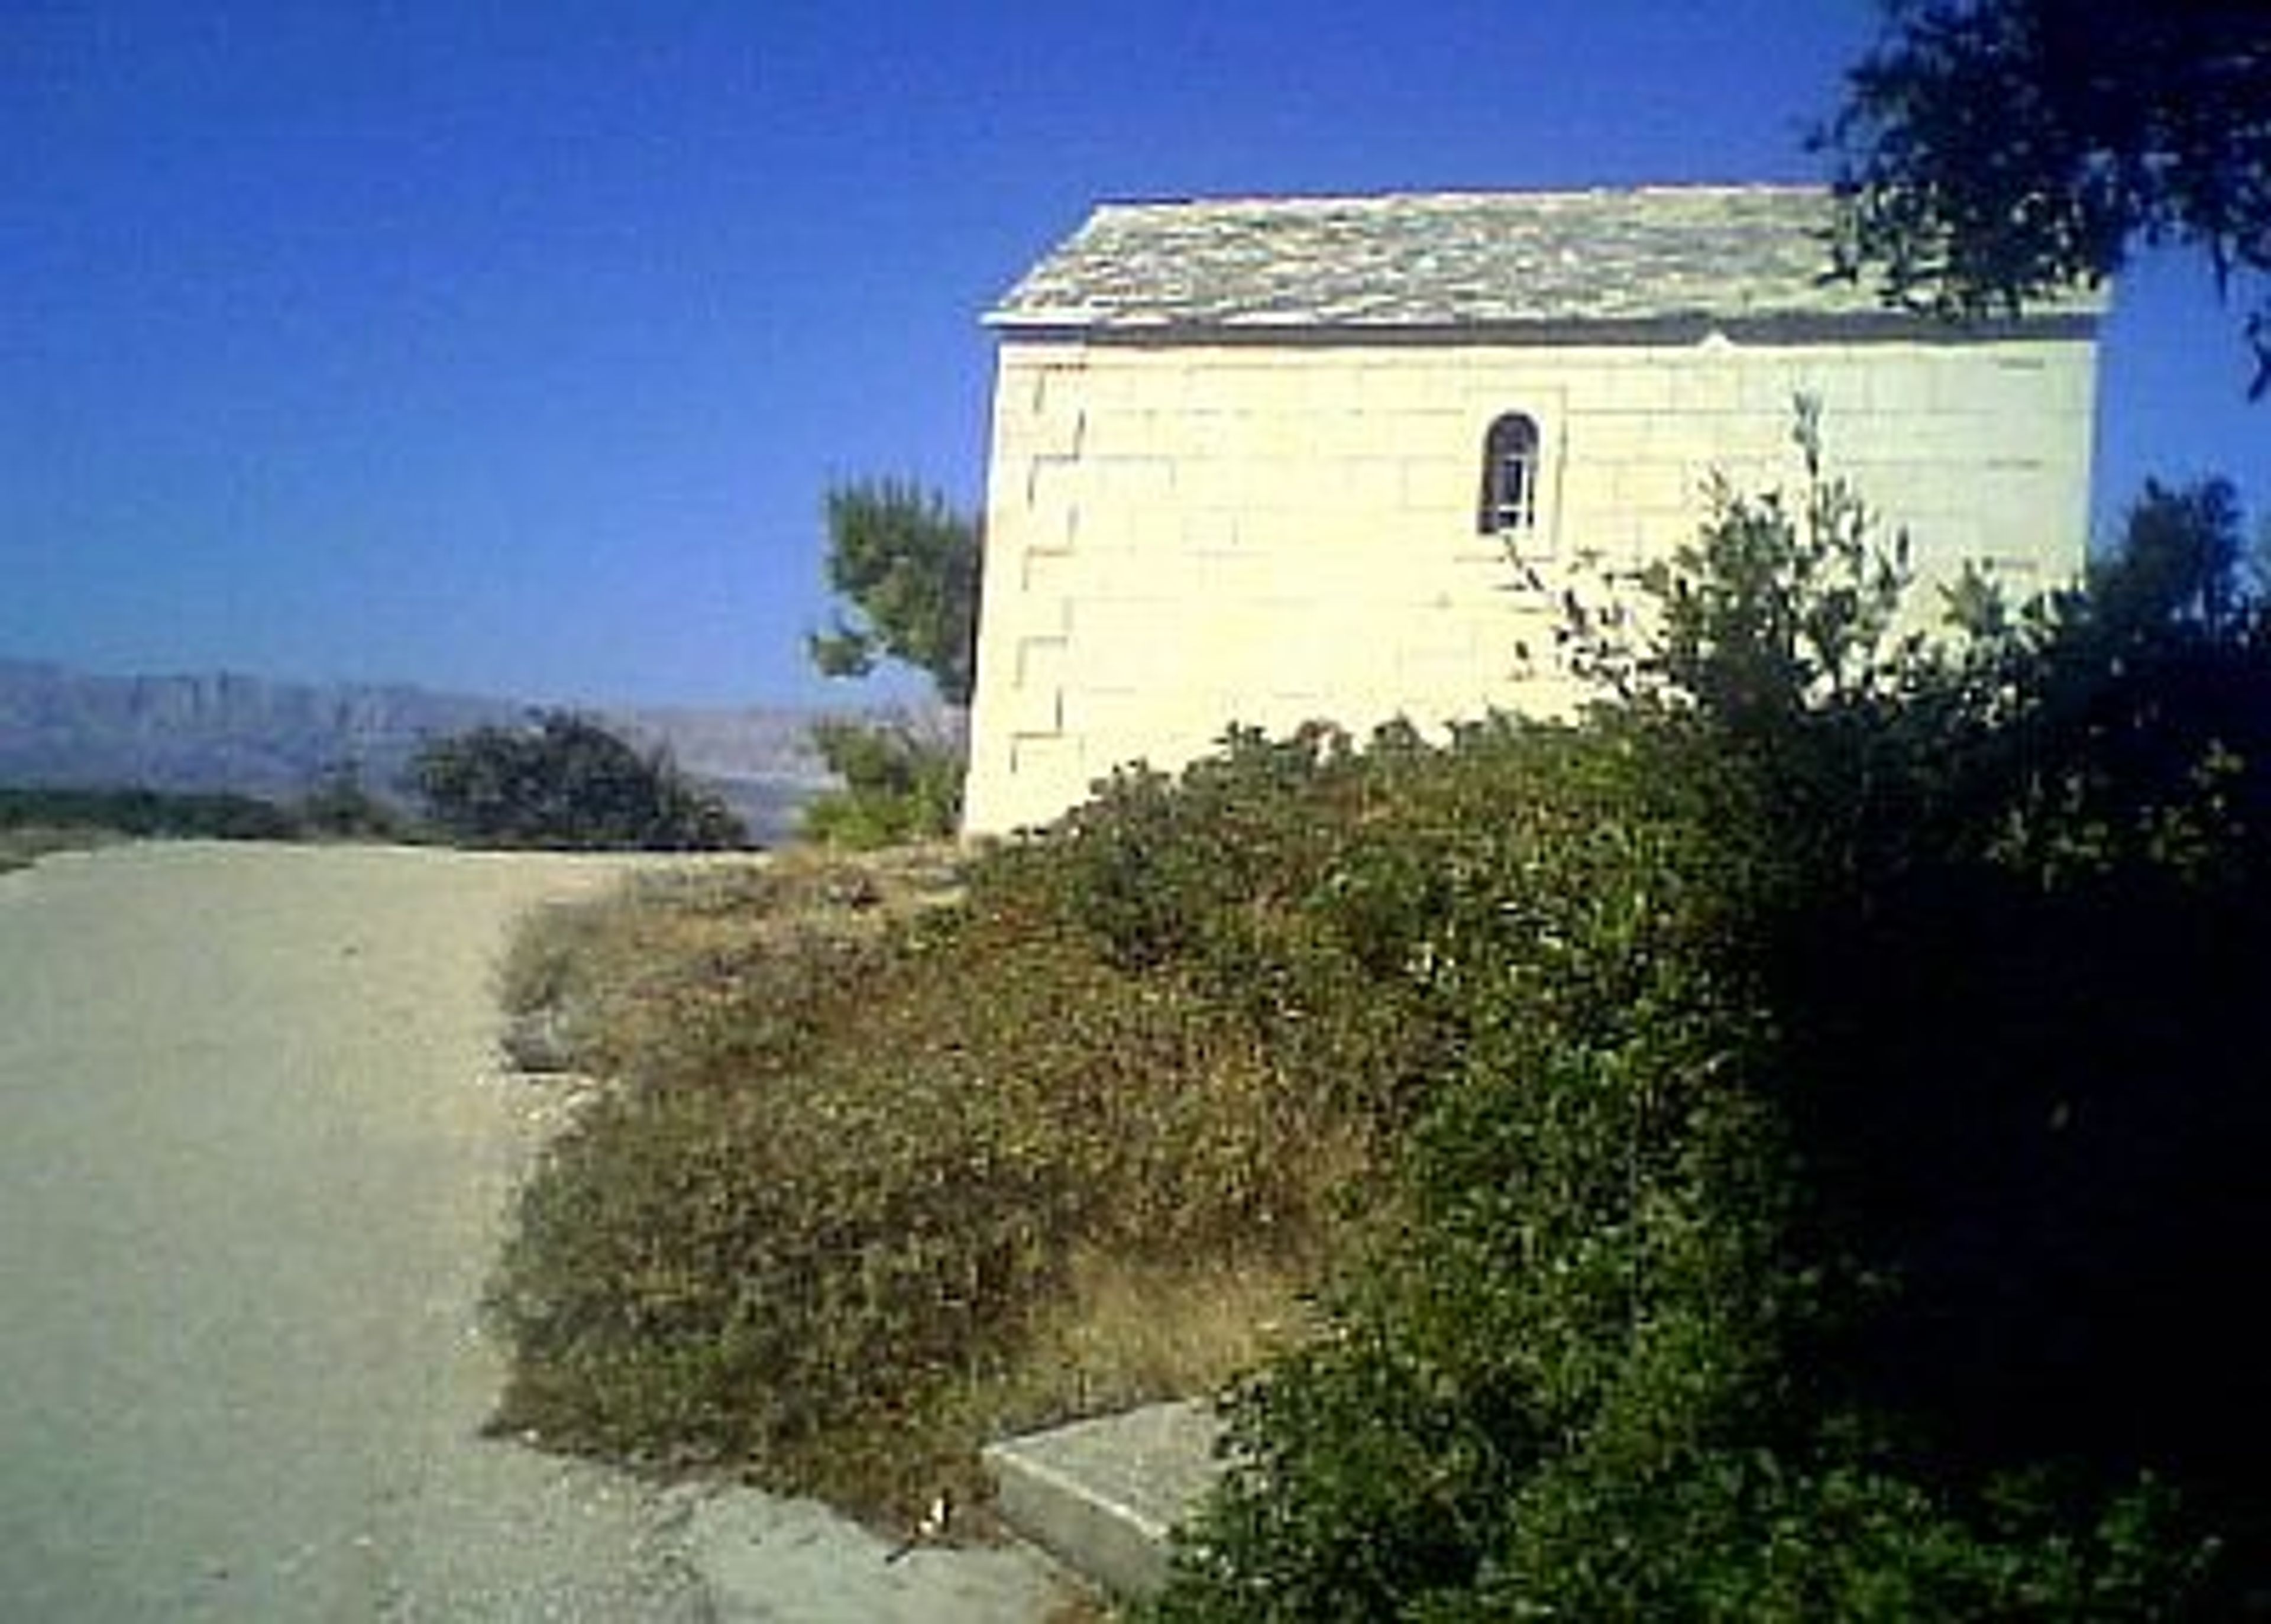 Chapel on the way to beach